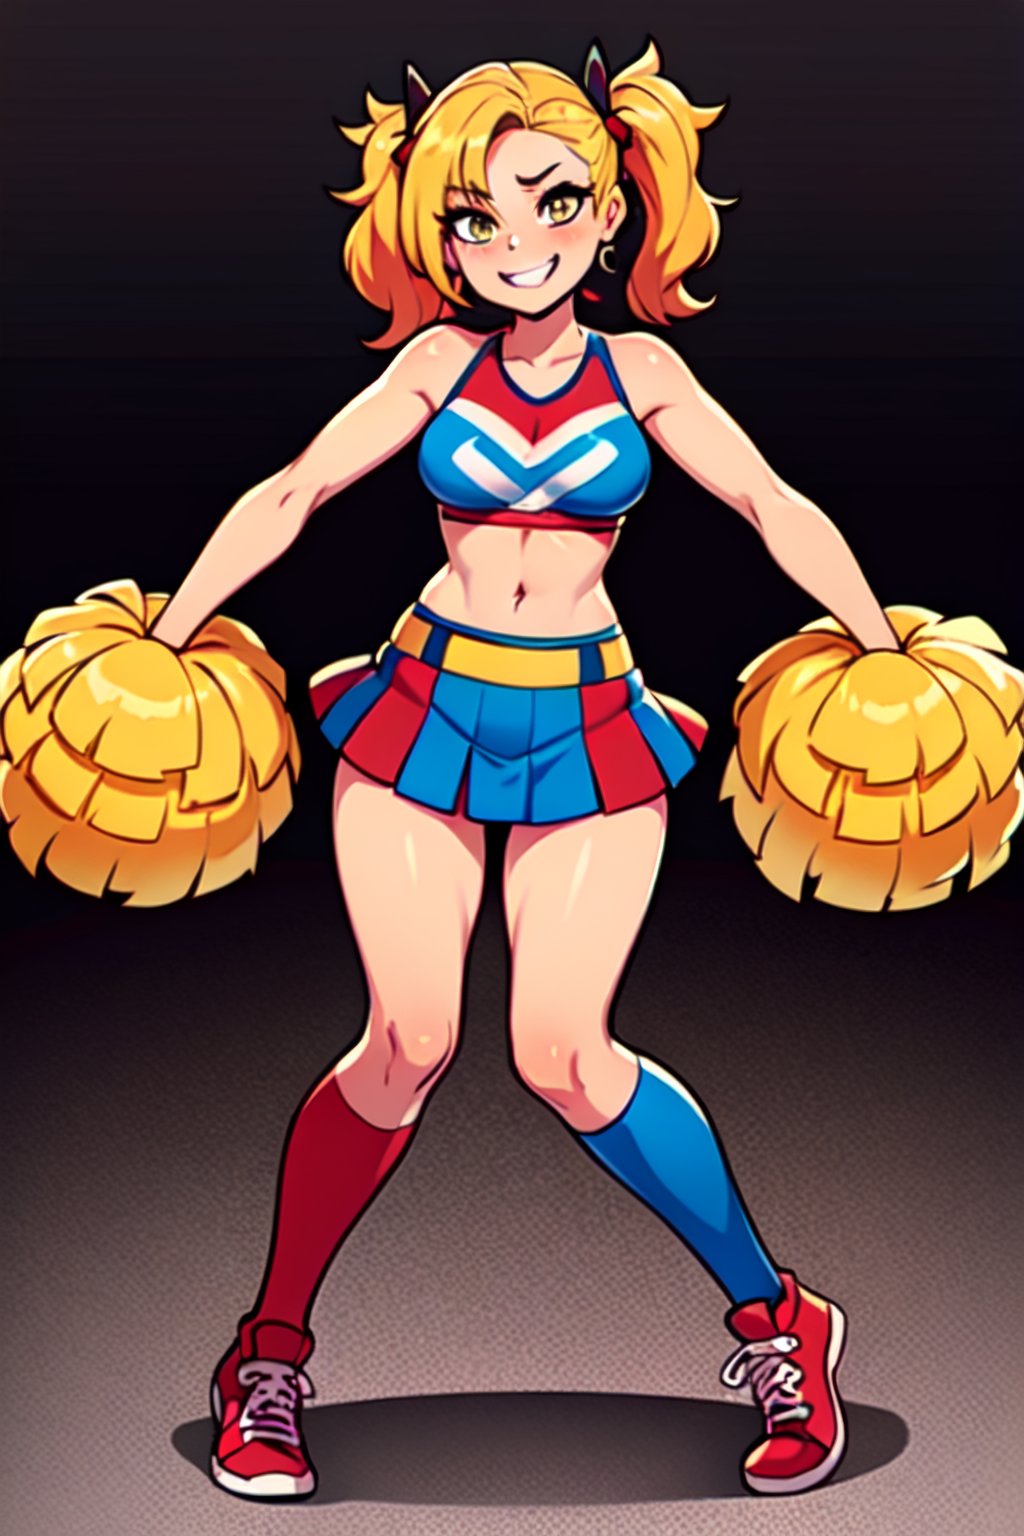 Harley Quinn, 1GIRL, golden_eyes, blonde_hair, pigtail_hair, standing, cheerleader_outfit, looking_at_viewer, hands on waist, full_body, sexy, beautiful, perfect, attractive